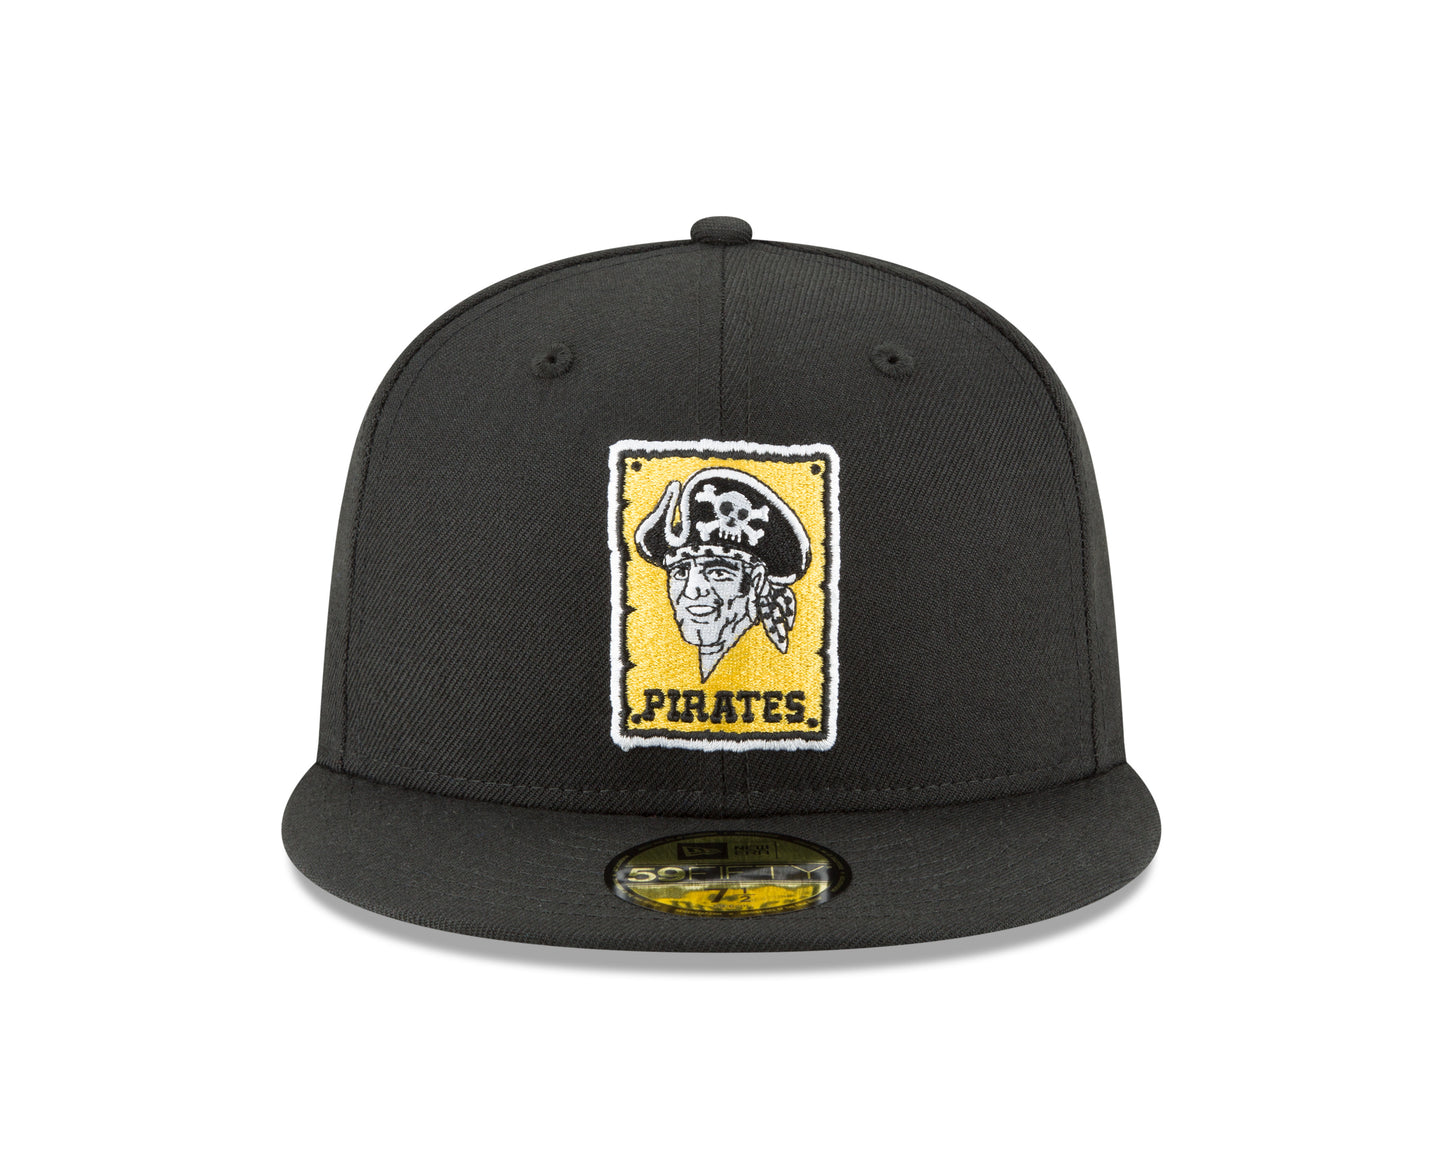 Pittsburgh Pirates New Era MLB Cooperstown 59fifty Fitted Hat - Black